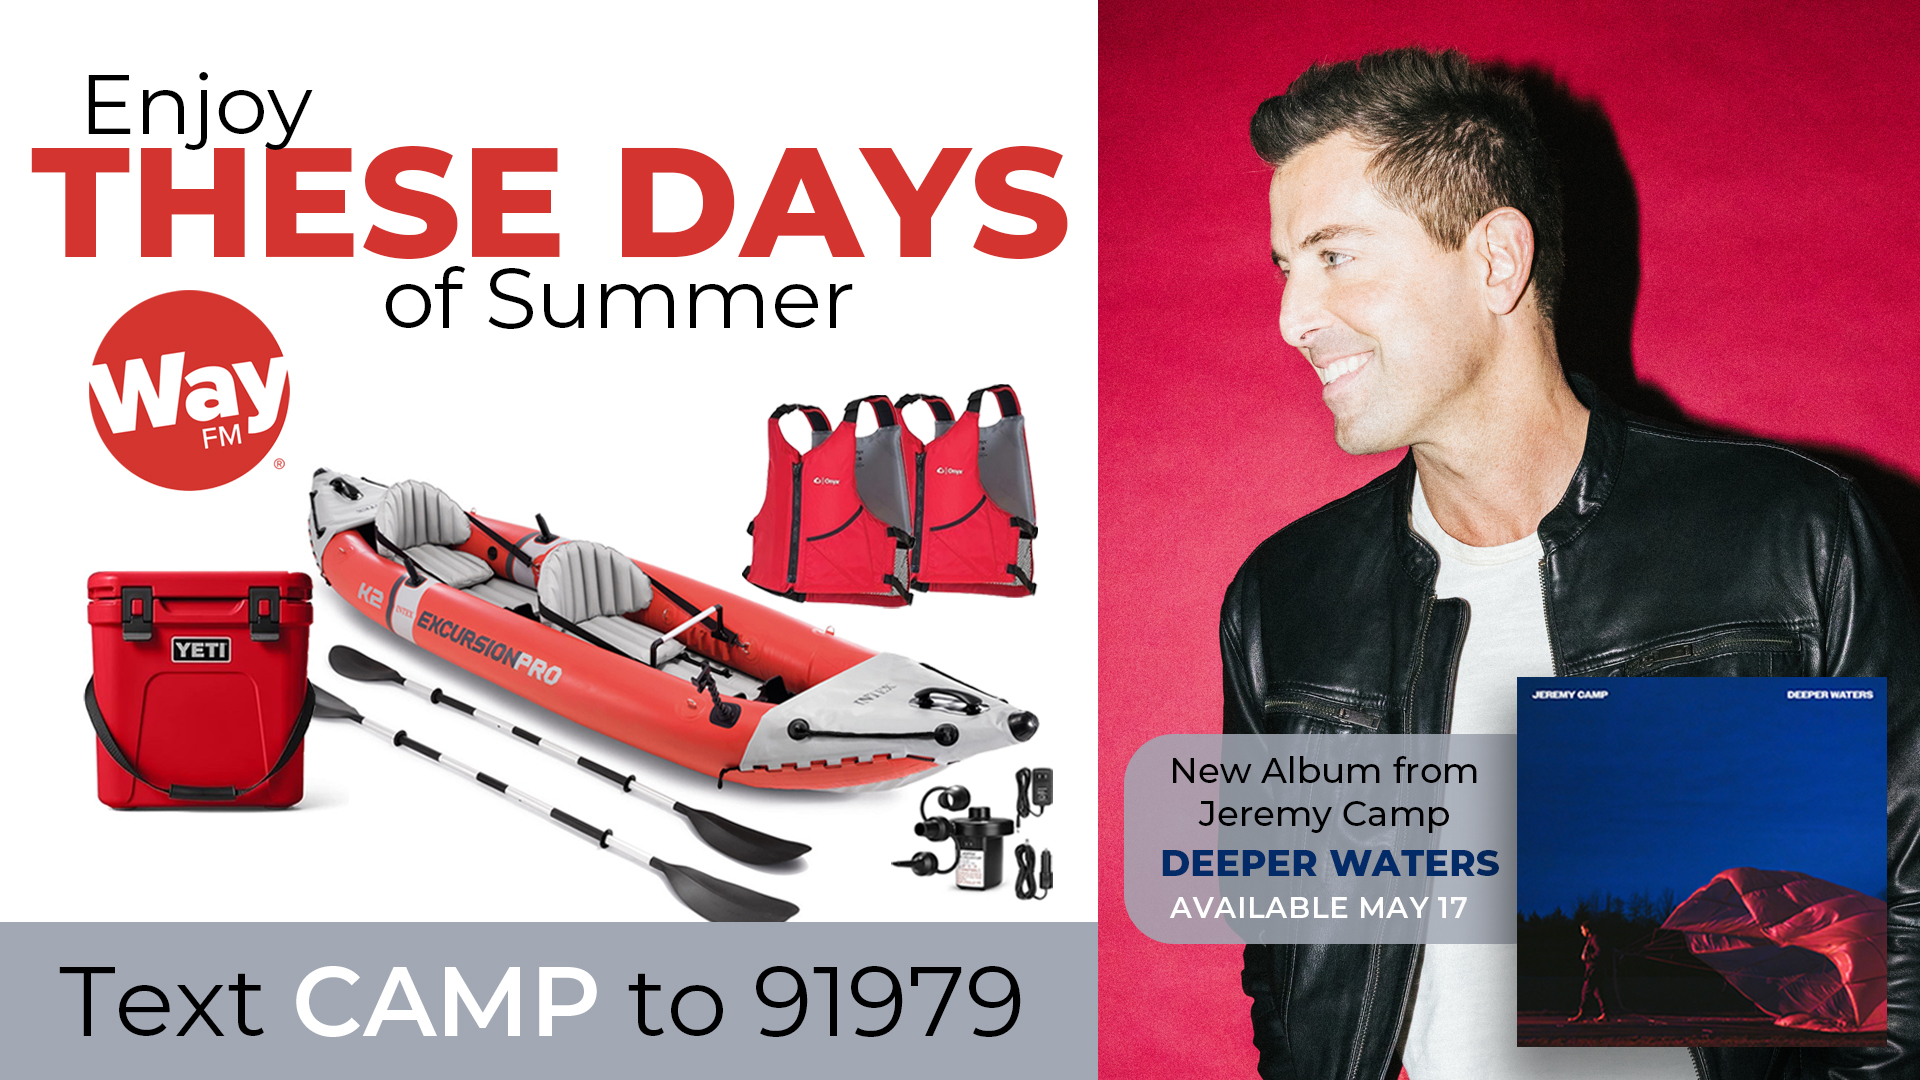 Win a kayak and Jeremy Camp’s new album “Deeper Waters”!